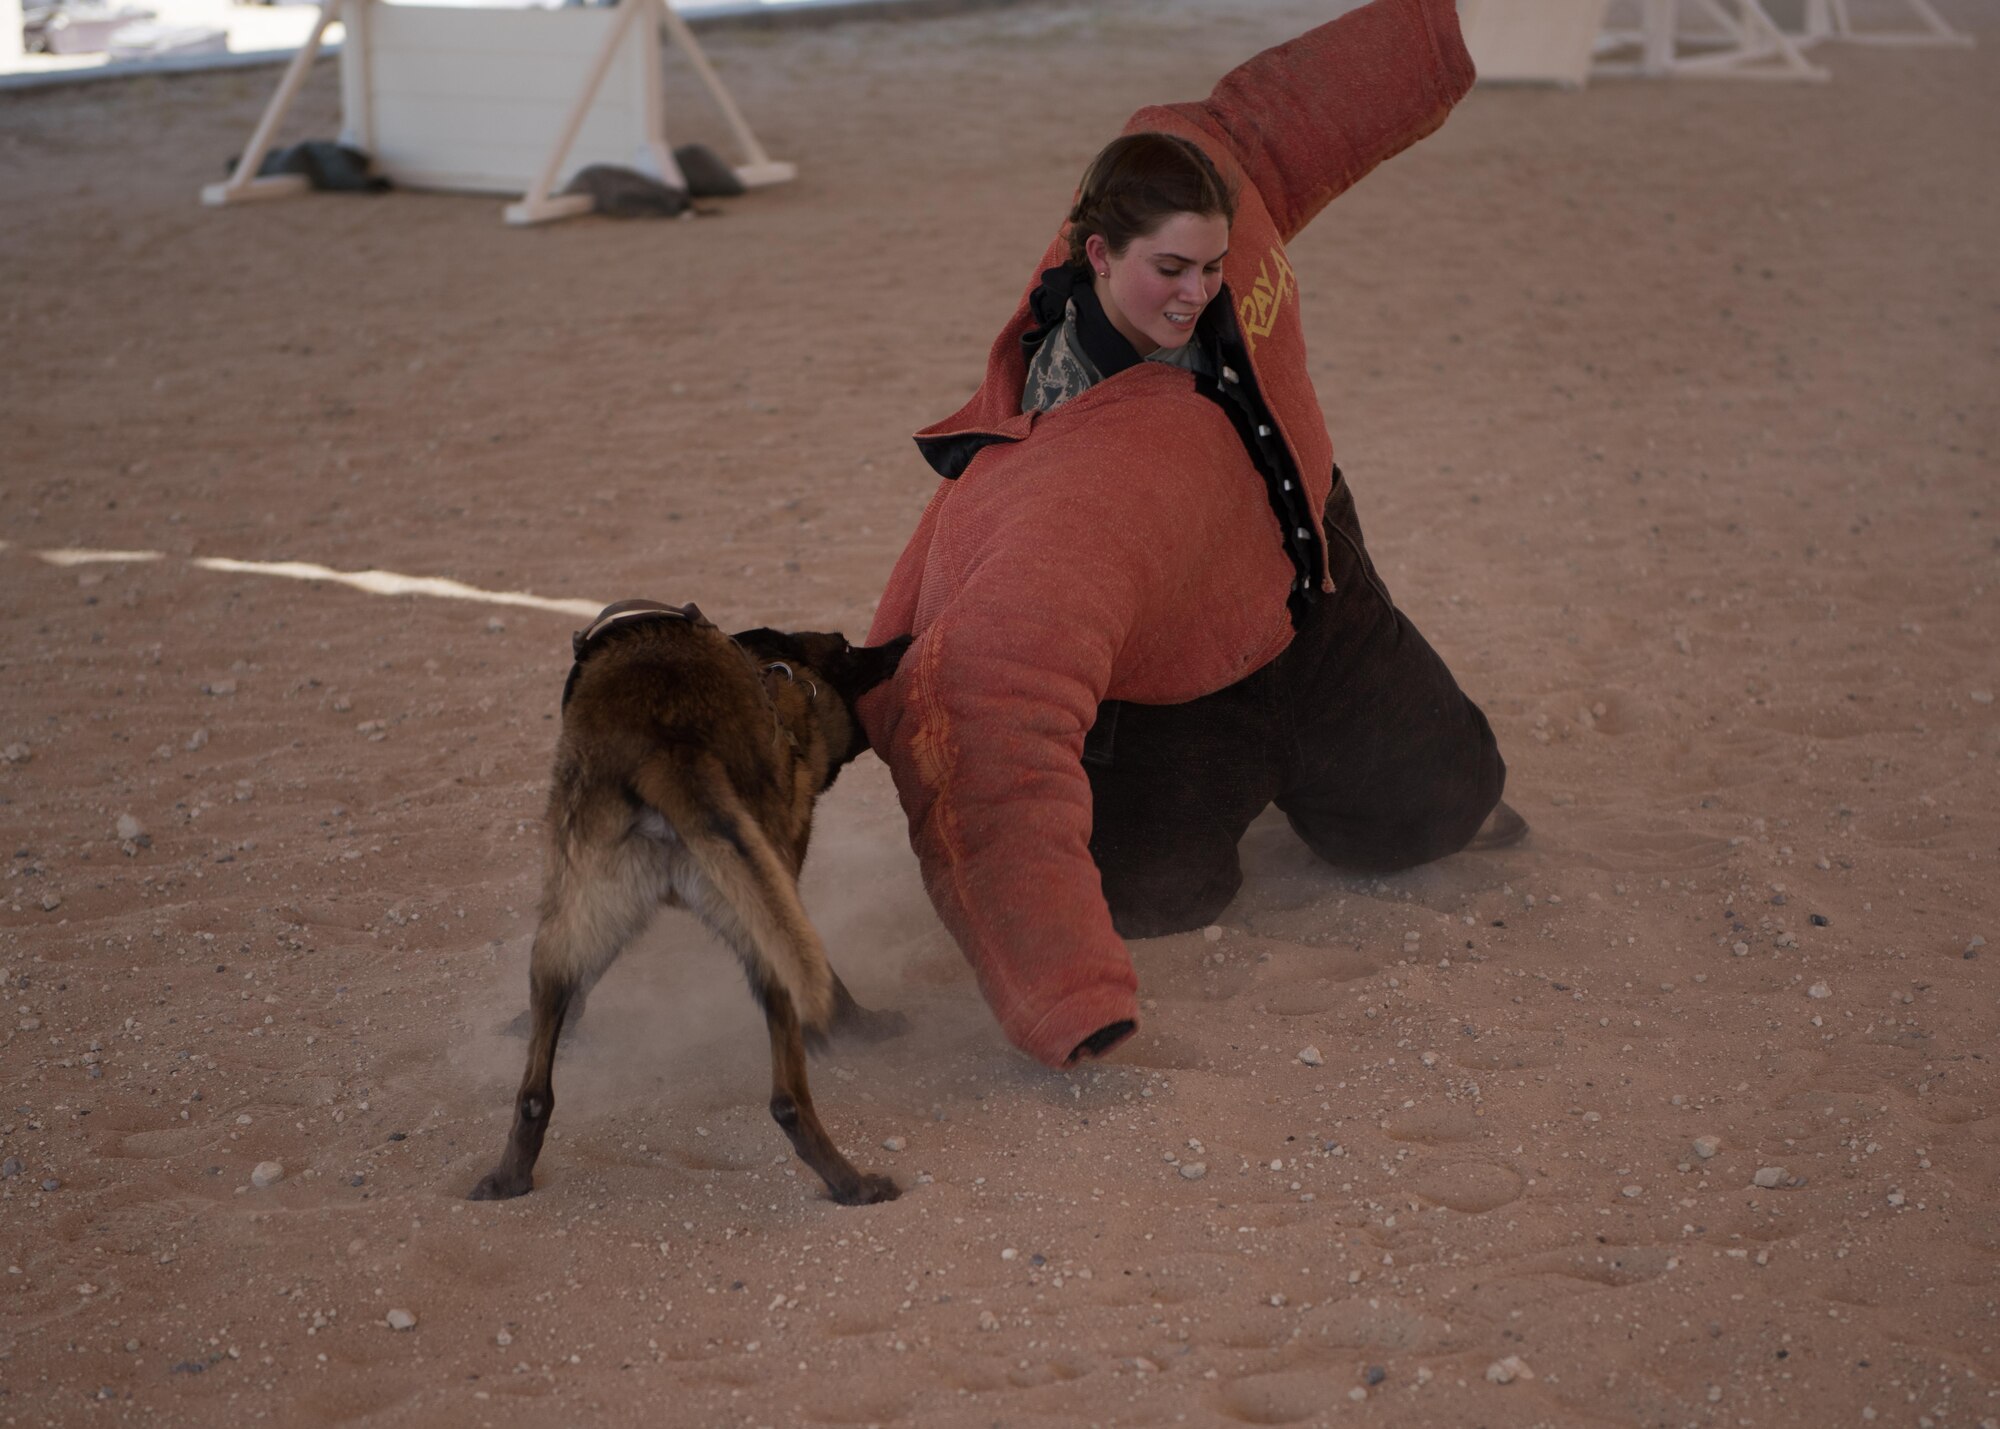 U.S. Air Force Academy Cadet Elizabeth Hartman gets taken to the ground by a military working dog during MWD aggression training at an undisclosed location in Southwest Asia, June 28, 2017. The U.S. Air Force Academy cadets are deployed to the 386th Air Expeditionary Wing as part of the academy’s Operation Air Force program, which exposes cadets to a variety of career fields to aid them in their future career selections.  (U.S. Air Force photo by Tech. Sgt. Jonathan Hehnly)